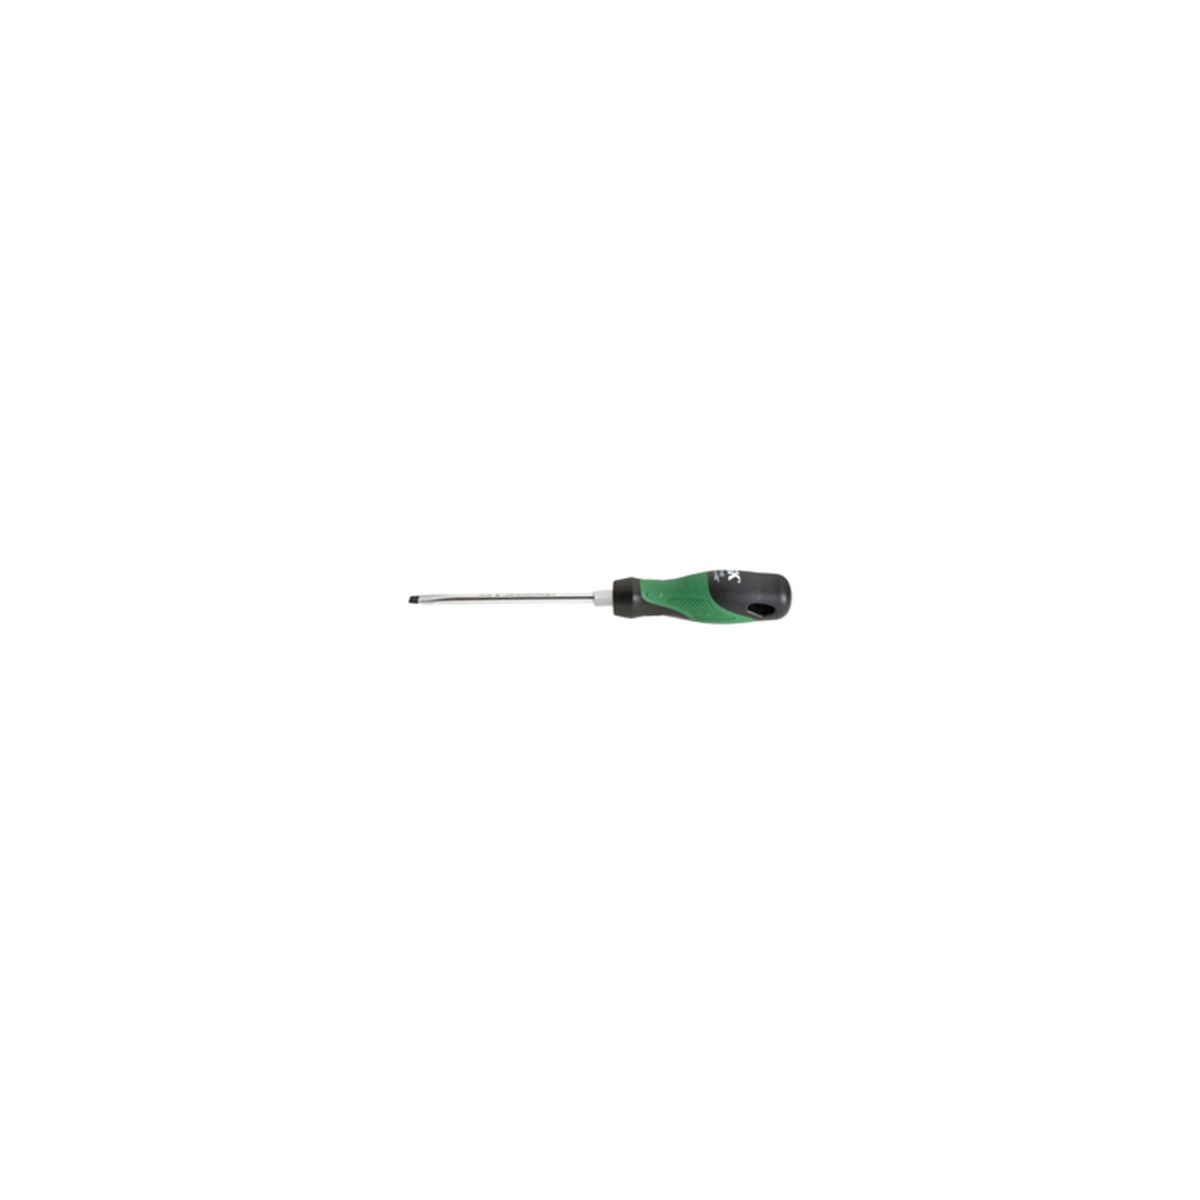 5.91" Tri-Molded Keystone Slotted Screwdriver with Hex Bolster